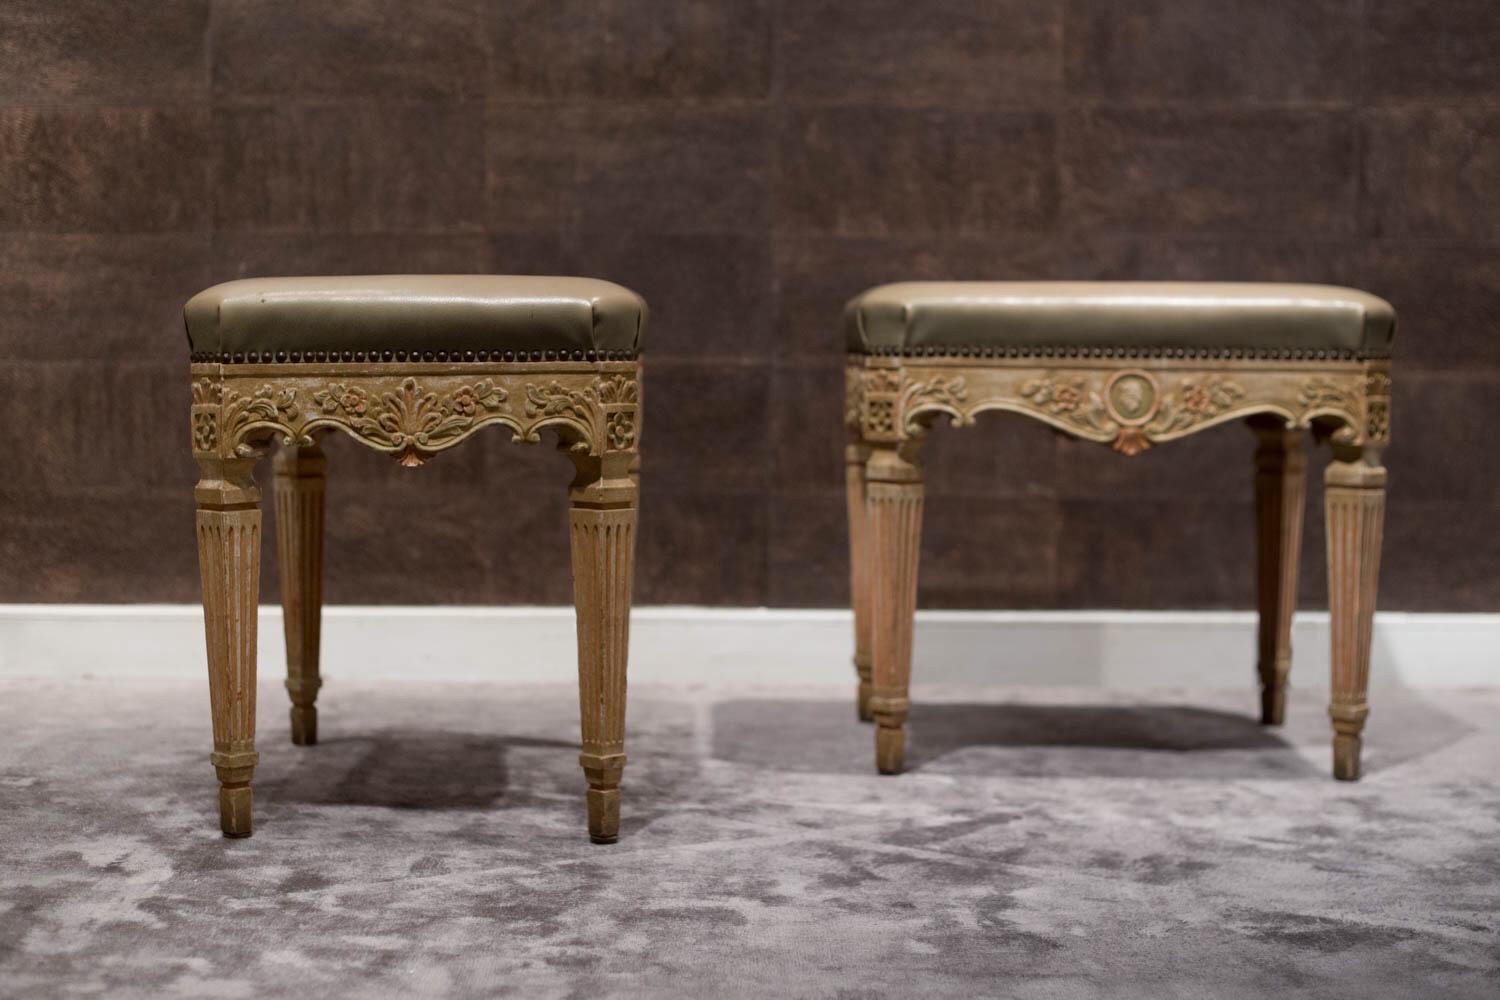 This highly elegant pair of benches is in Louis XVI style, made in the mid-19th century.
The four legs are tapered in a truncated pyramidal shape, and the band is decorated with polychrome carvings with floral motifs interspersed with decorative